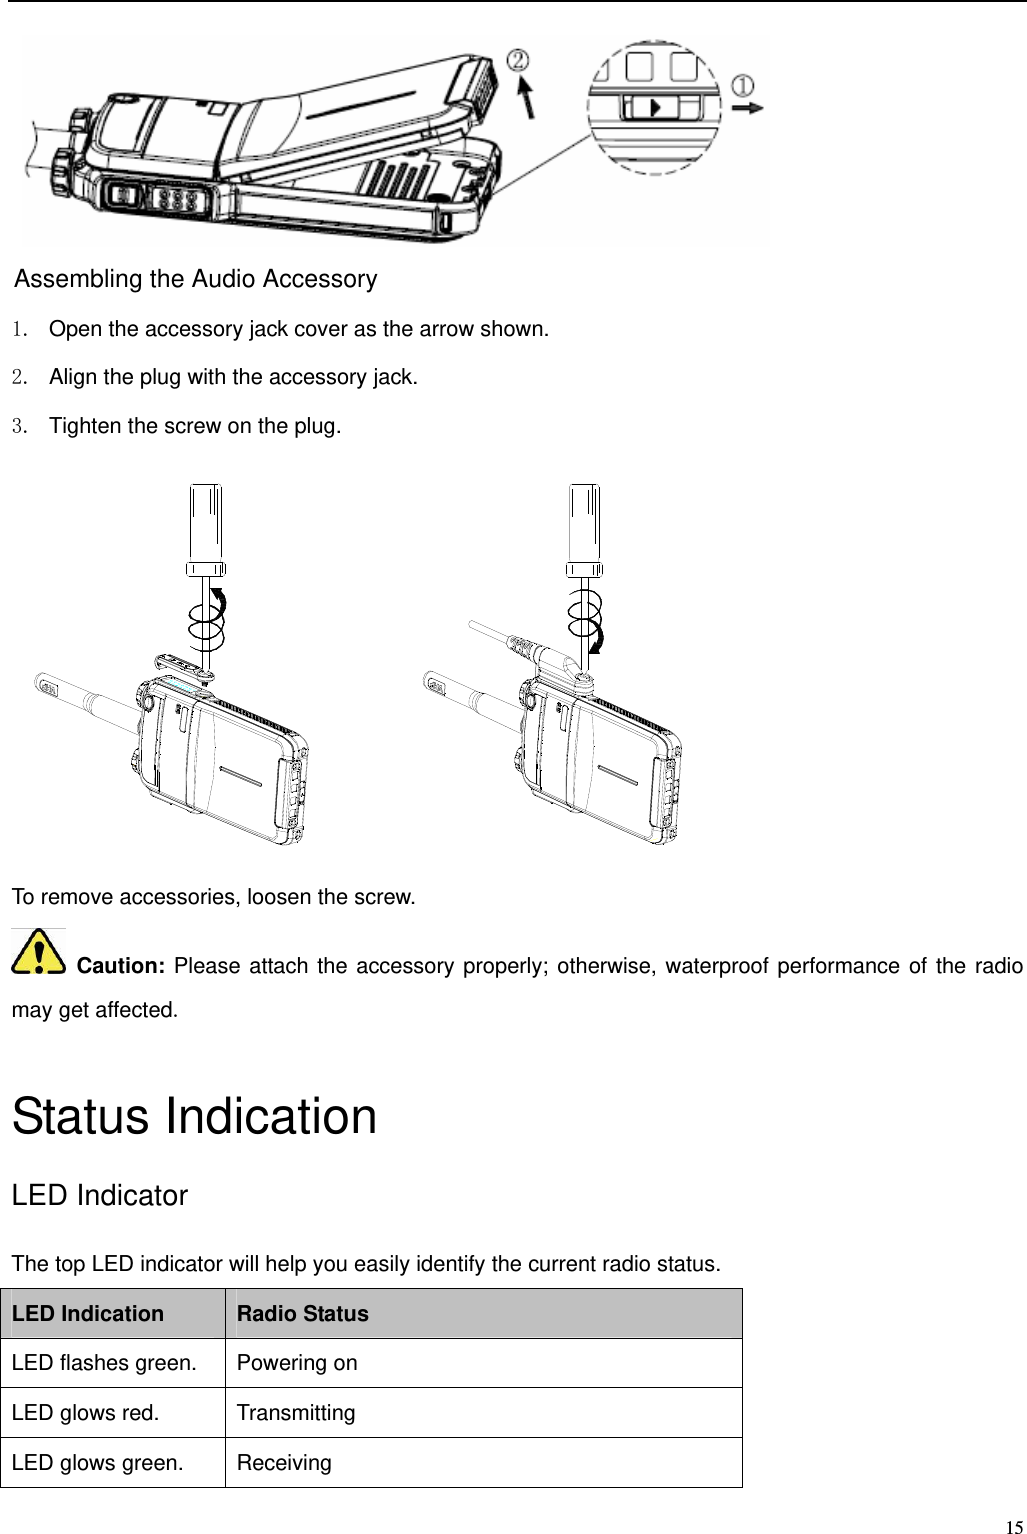                                                                                                              15  Assembling the Audio Accessory 1.  Open the accessory jack cover as the arrow shown.   2.  Align the plug with the accessory jack.   3.  Tighten the screw on the plug.        To remove accessories, loosen the screw.    Caution: Please attach the accessory properly; otherwise, waterproof performance of the radio may get affected.   Status Indication LED Indicator The top LED indicator will help you easily identify the current radio status.   LED Indication Radio Status LED flashes green. Powering on LED glows red. Transmitting LED glows green. Receiving 